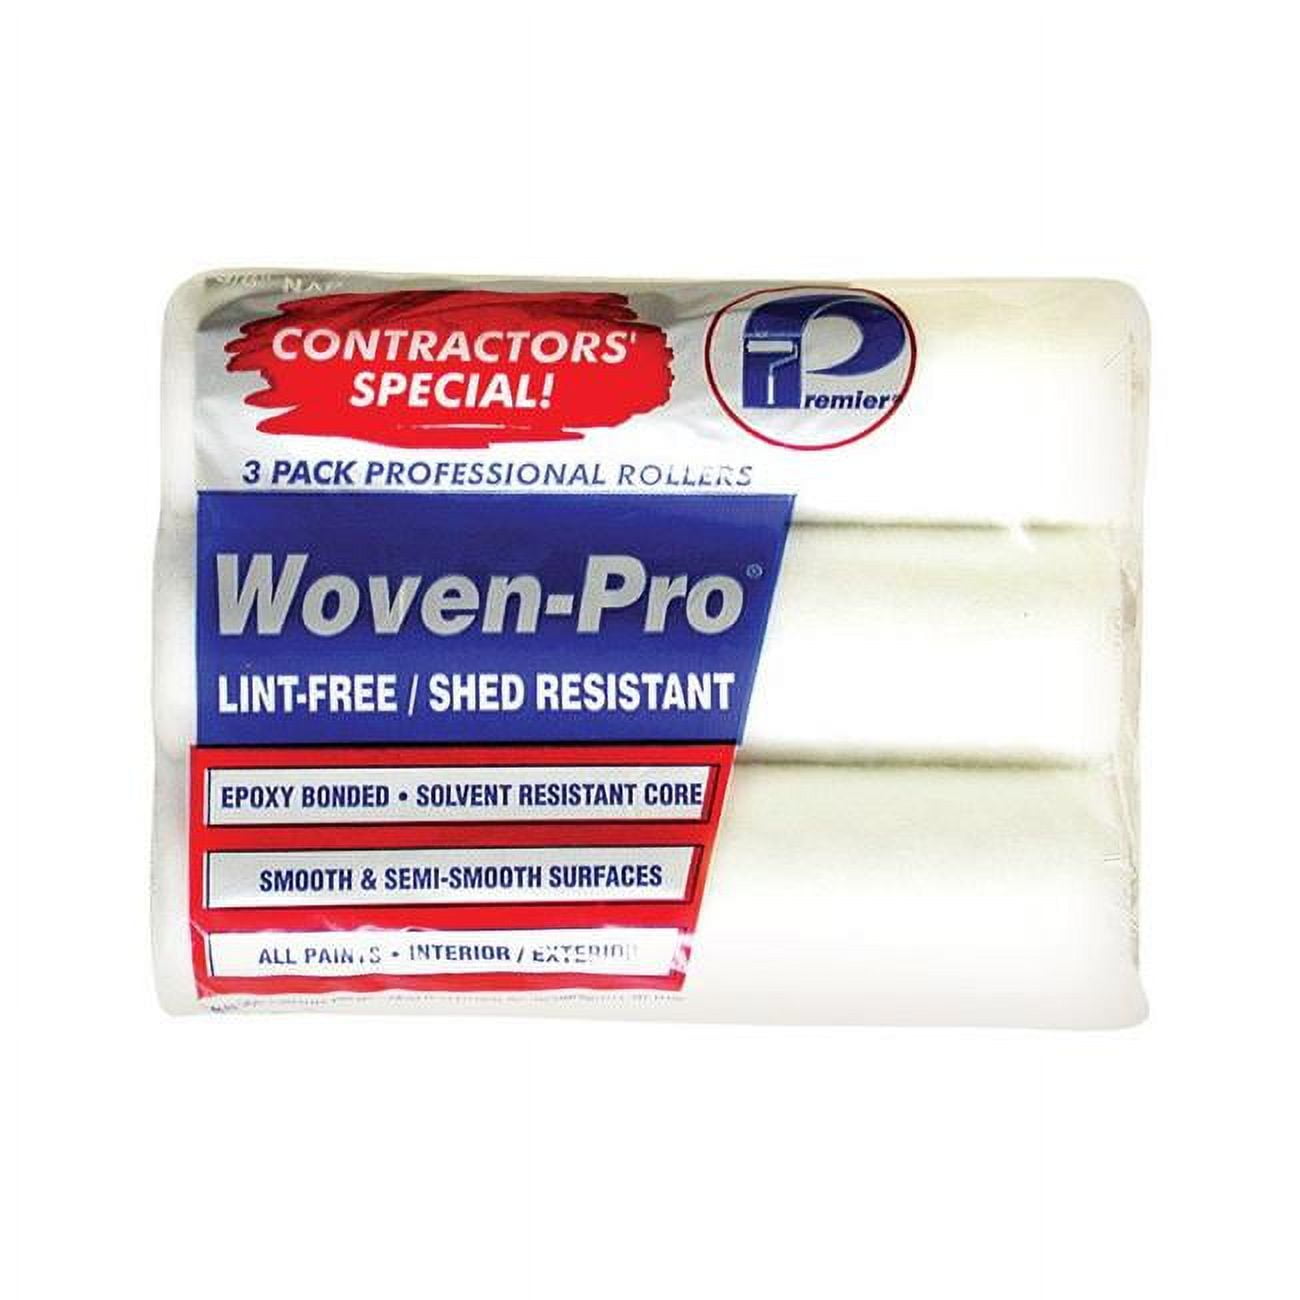 1882513 Woven-pro Polyester 0.38 X 9 In. Paint Roller Cover For Smooth, Semi-smooth - Pack Of 3